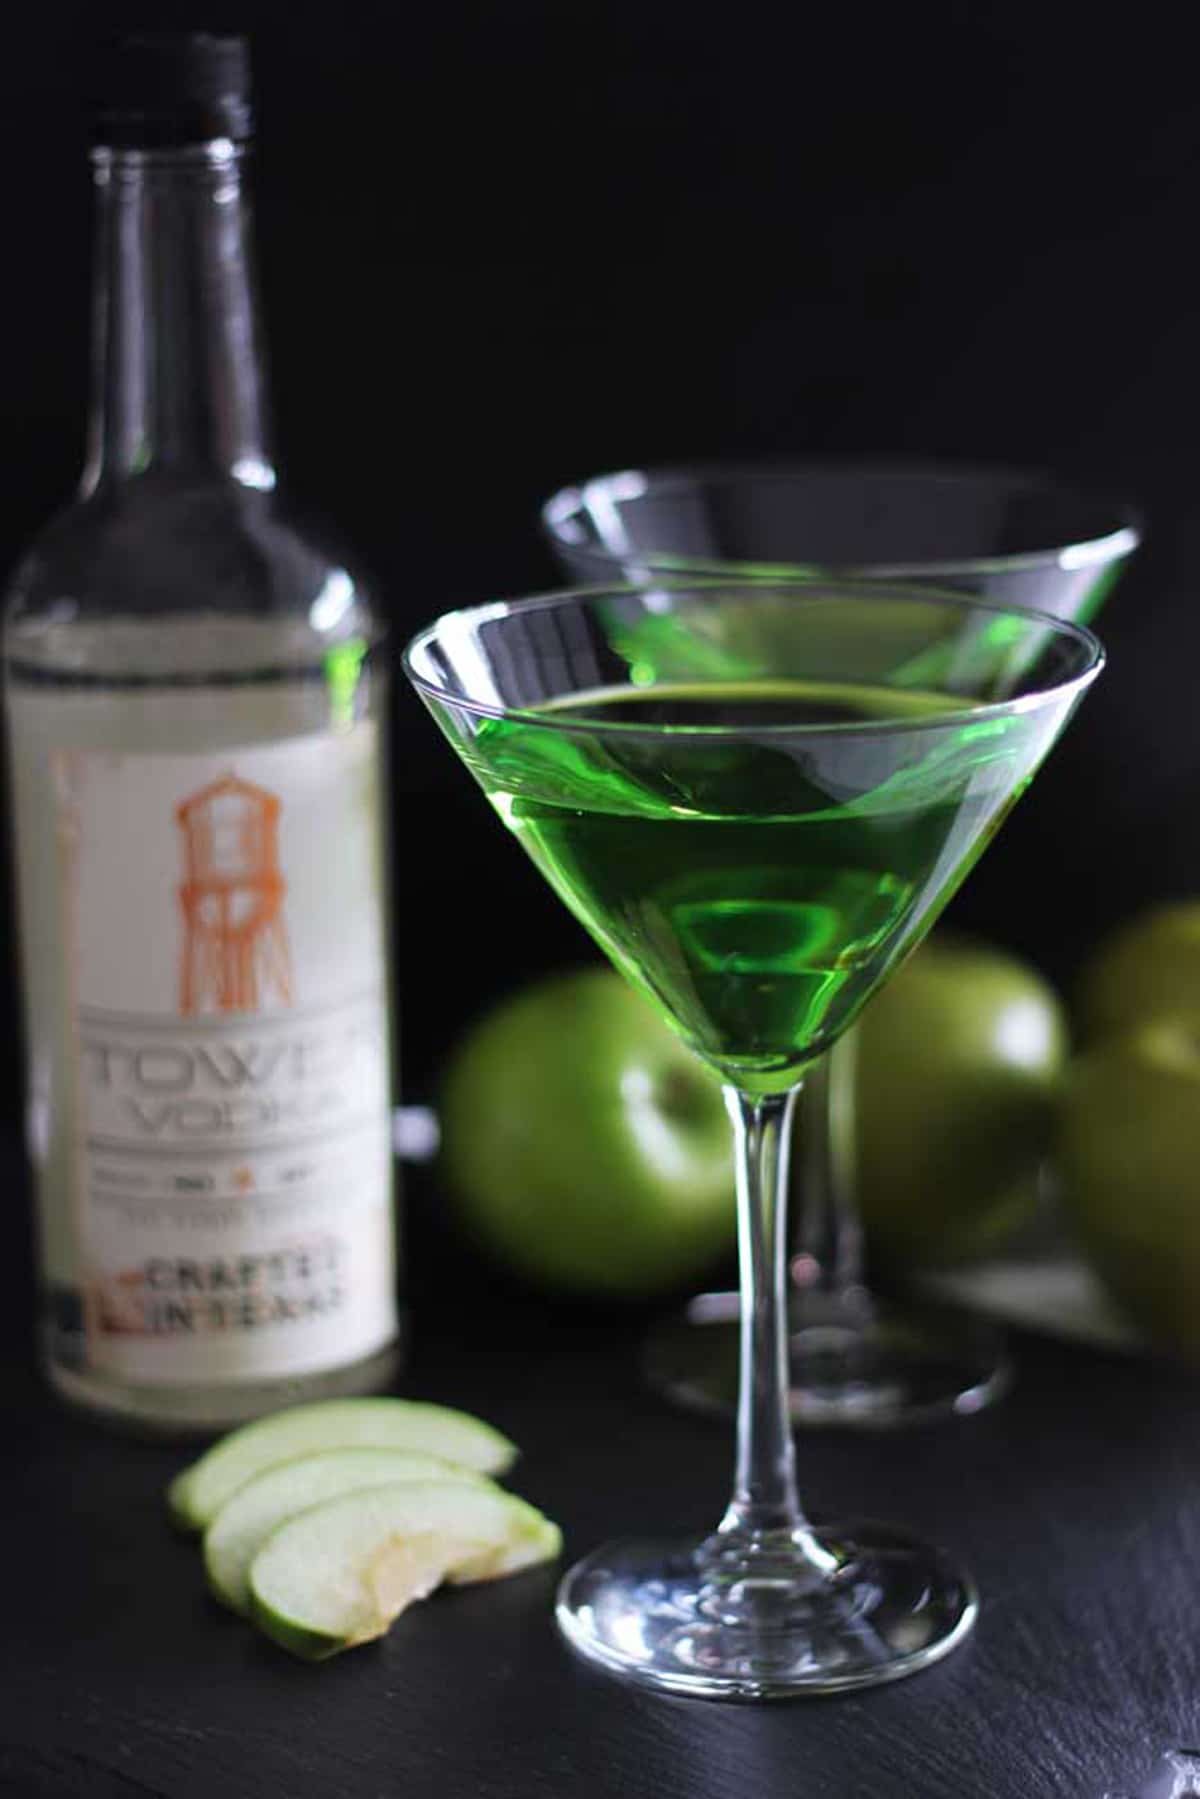 Two martini glasses filled with a Green Apple Martini cocktail sitting on a black table, Tower Vodka Bottle and green apples on the table.